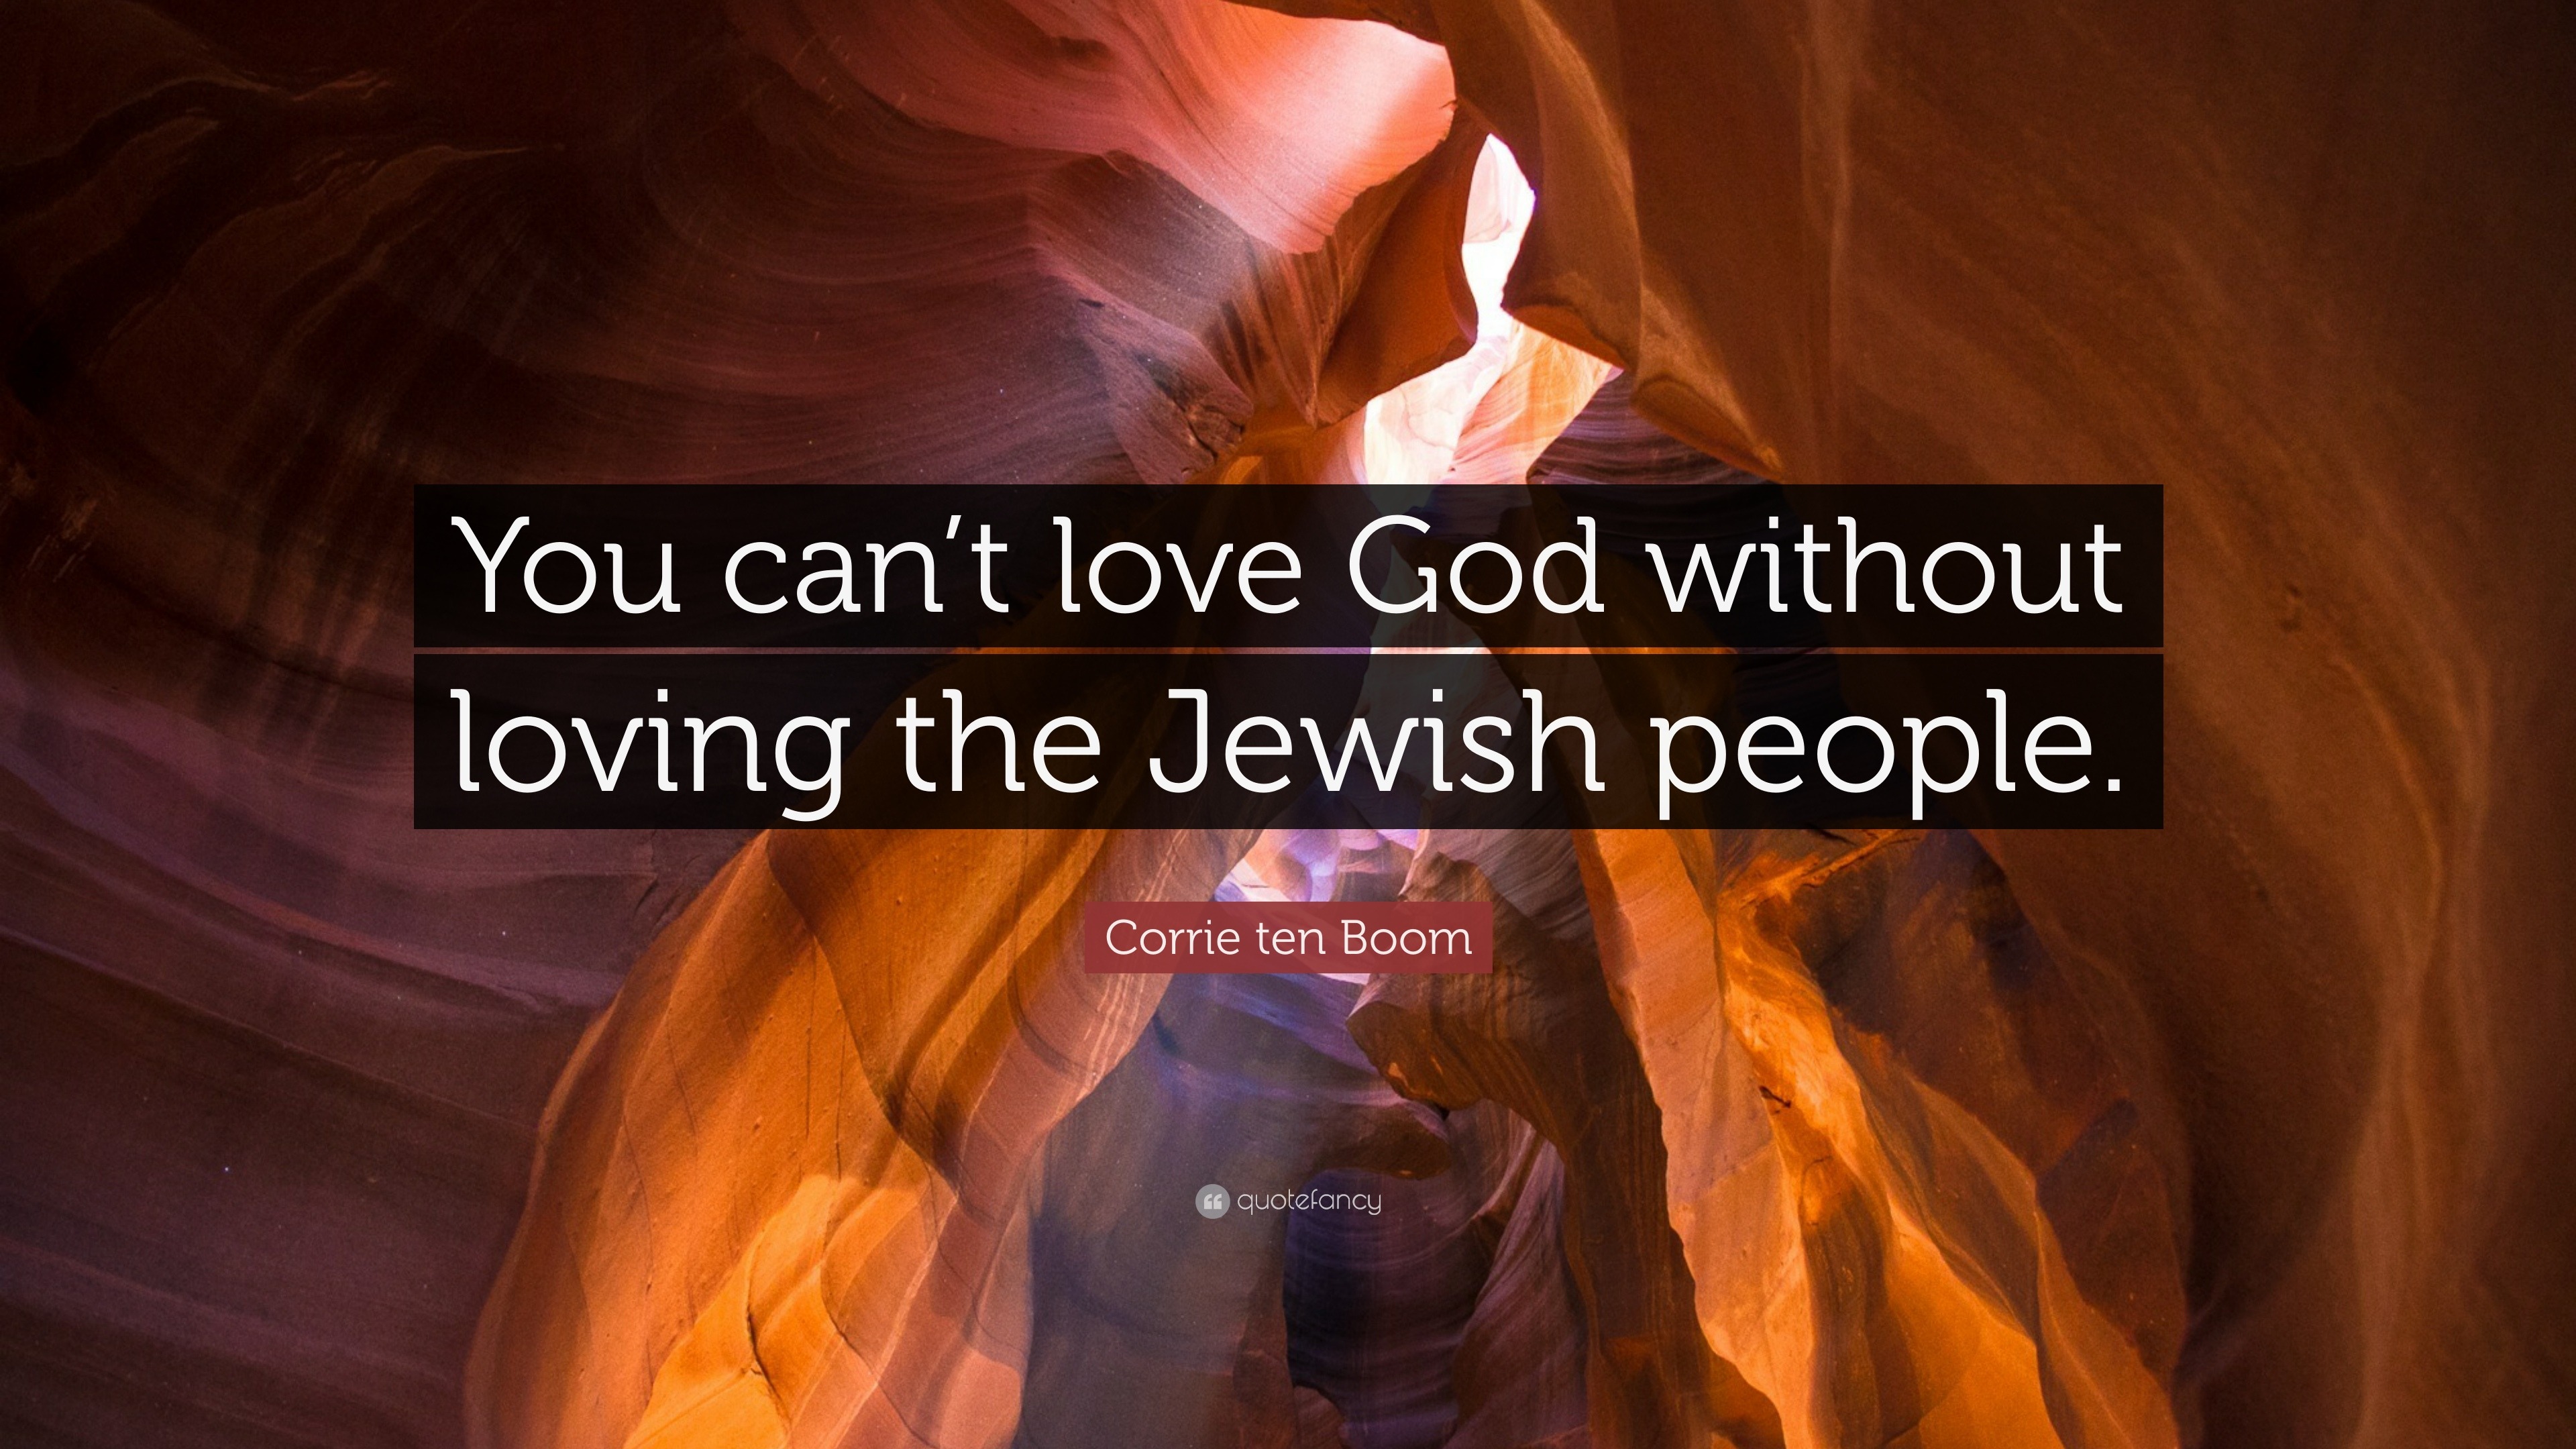 Corrie ten Boom Quote “You can t love God without loving the Jewish